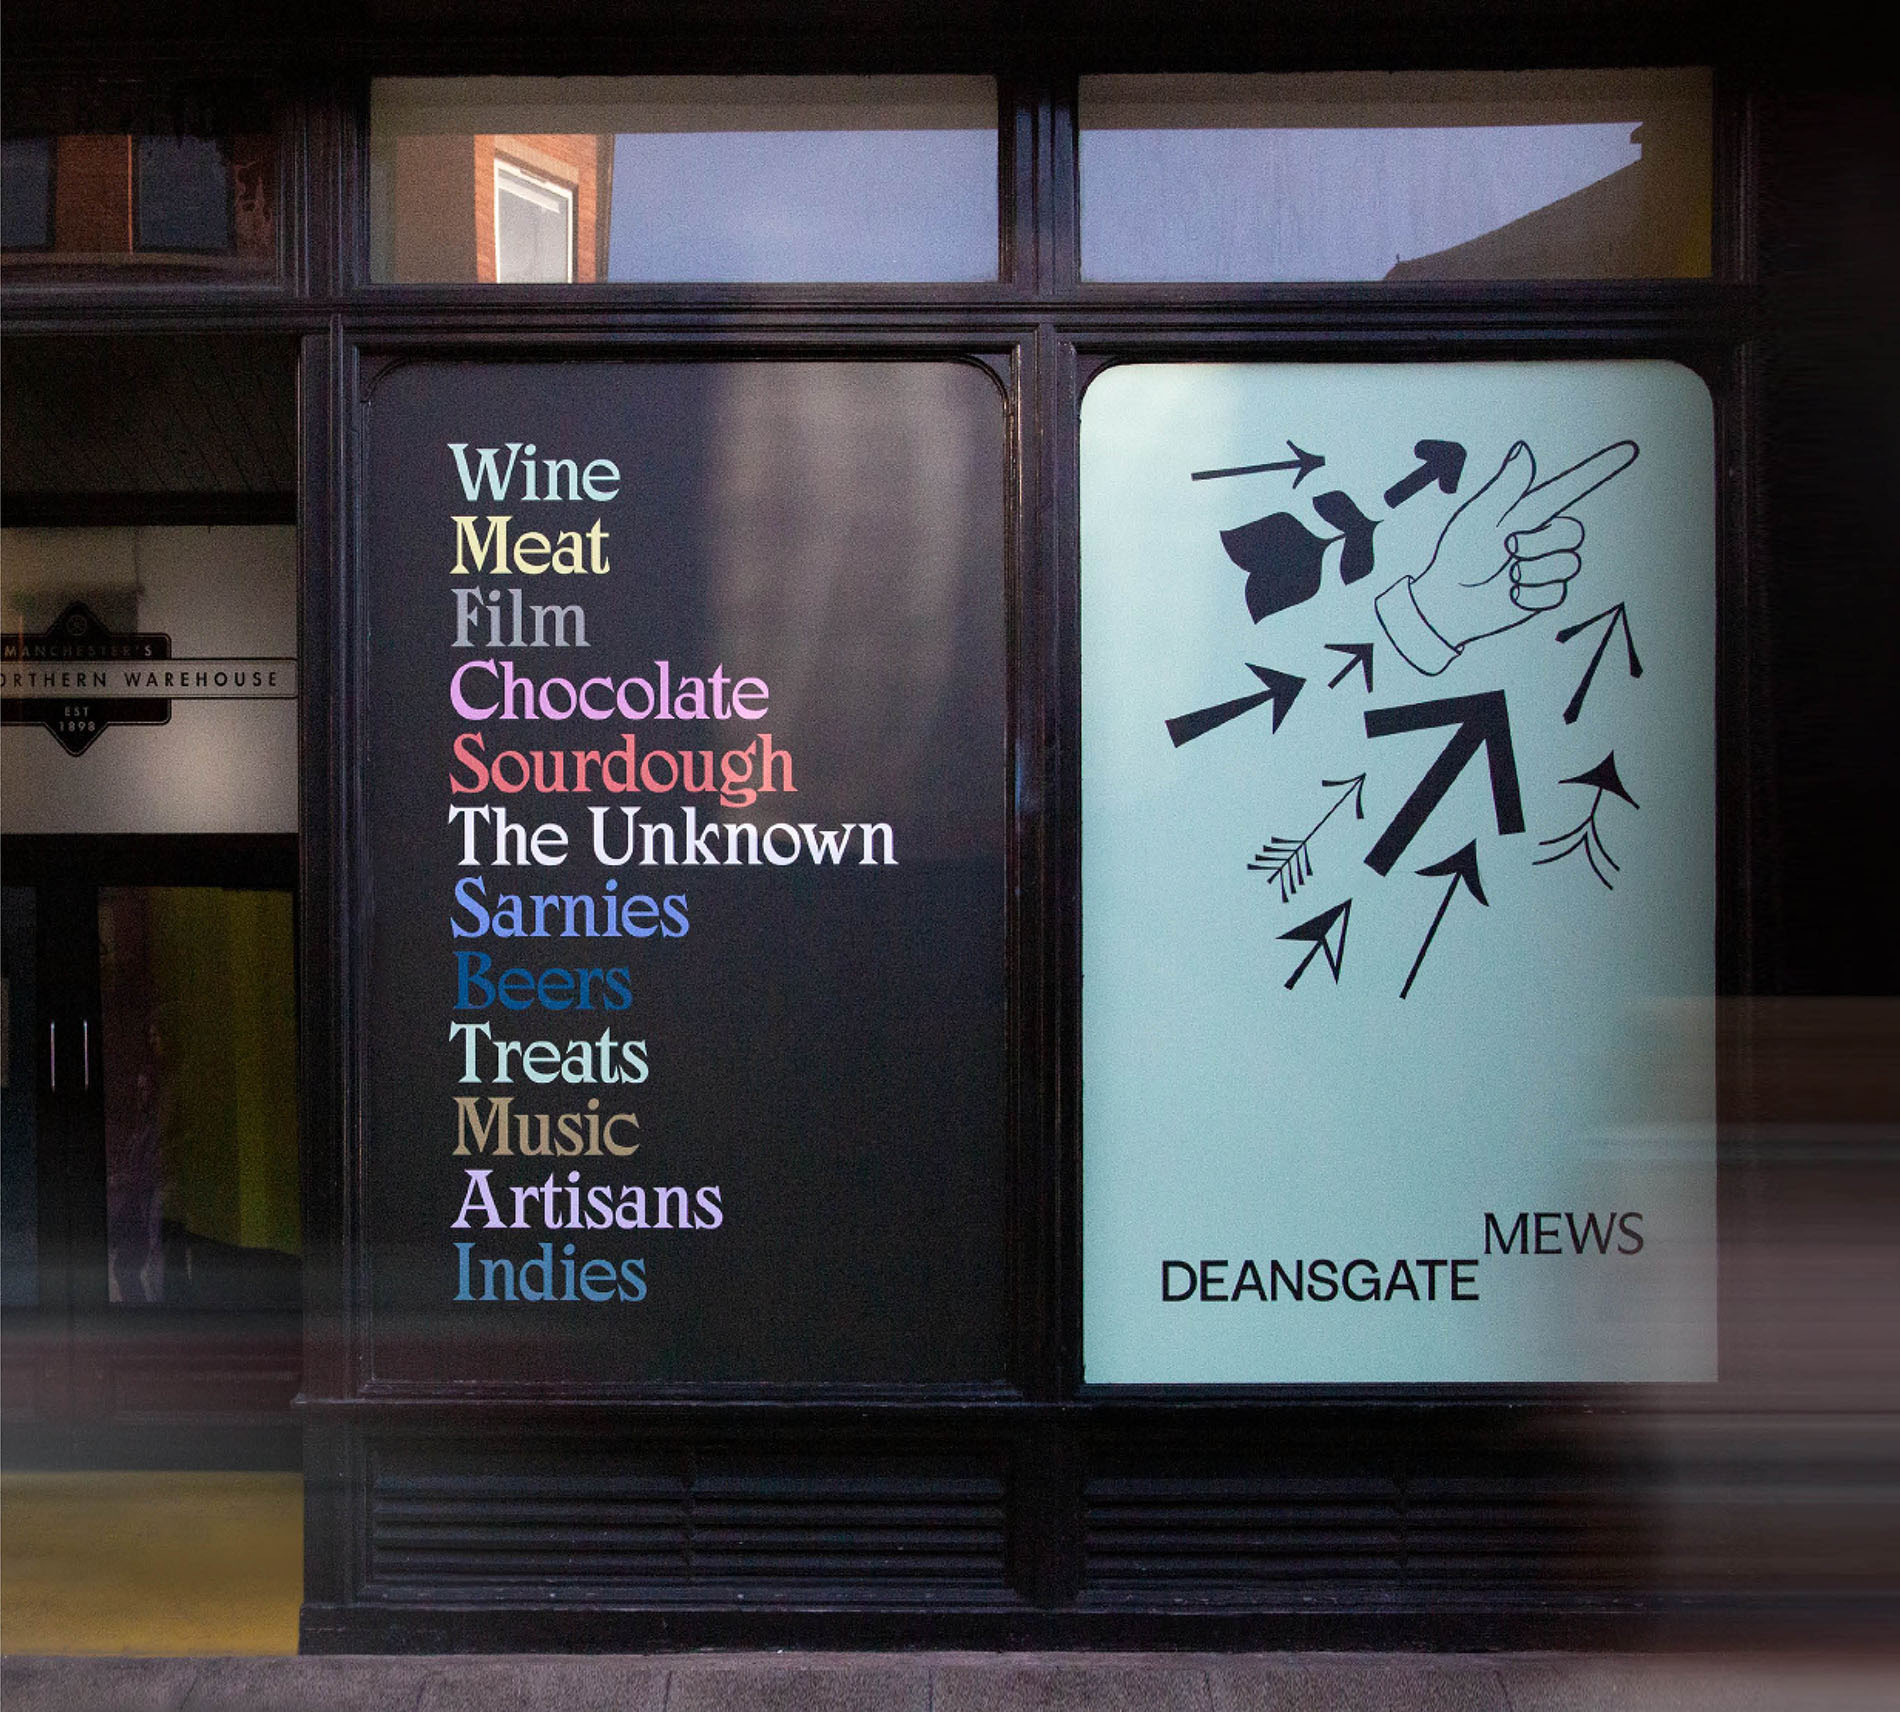 Brand Identity for Deansgate Mews by Ensemble